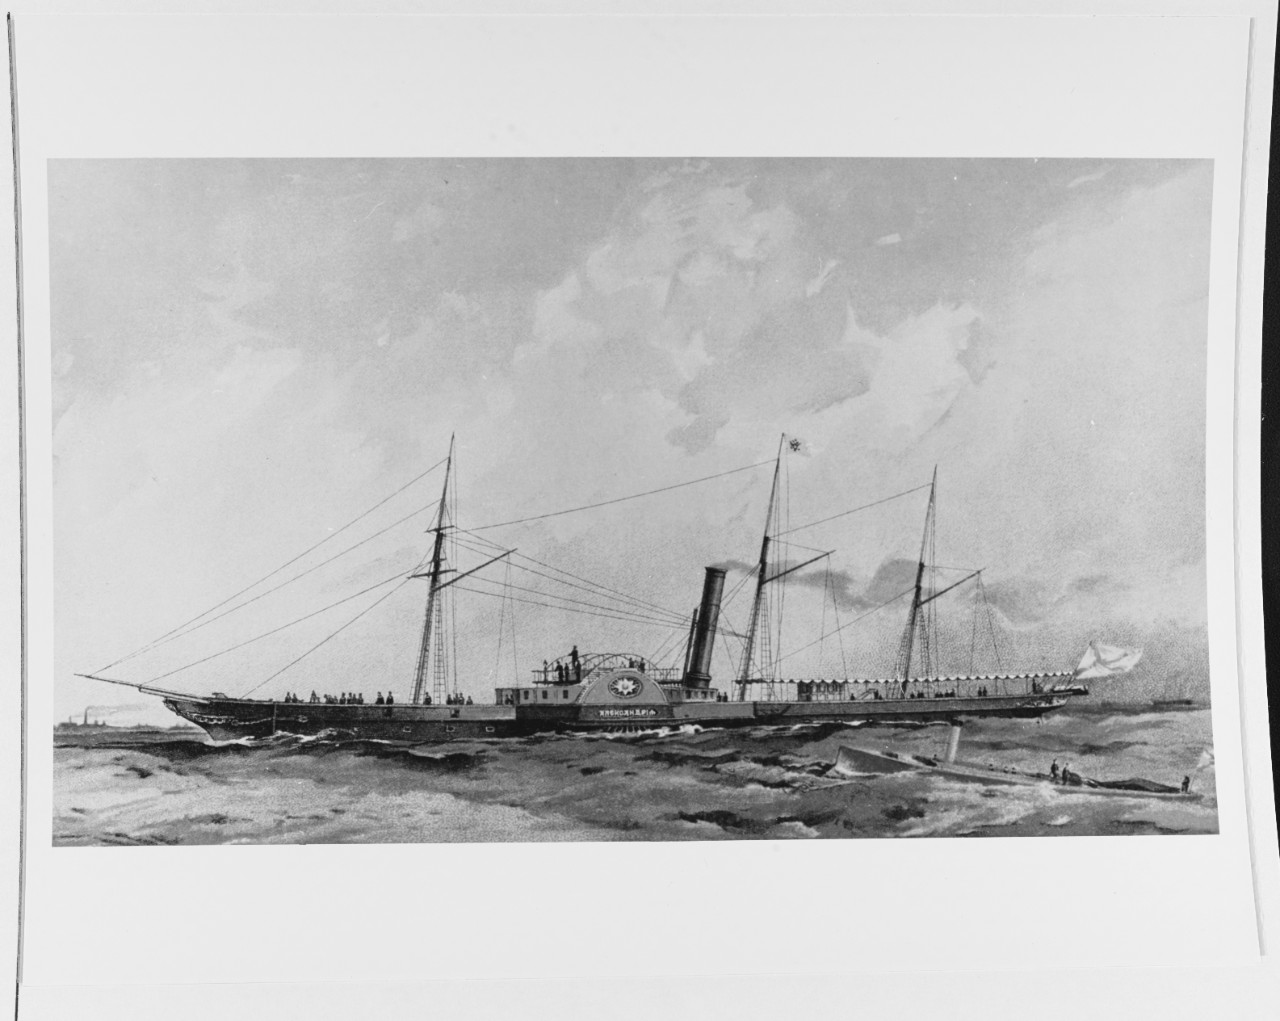 ALEXANDRIA (Russian Imperial Yacht, 1851)